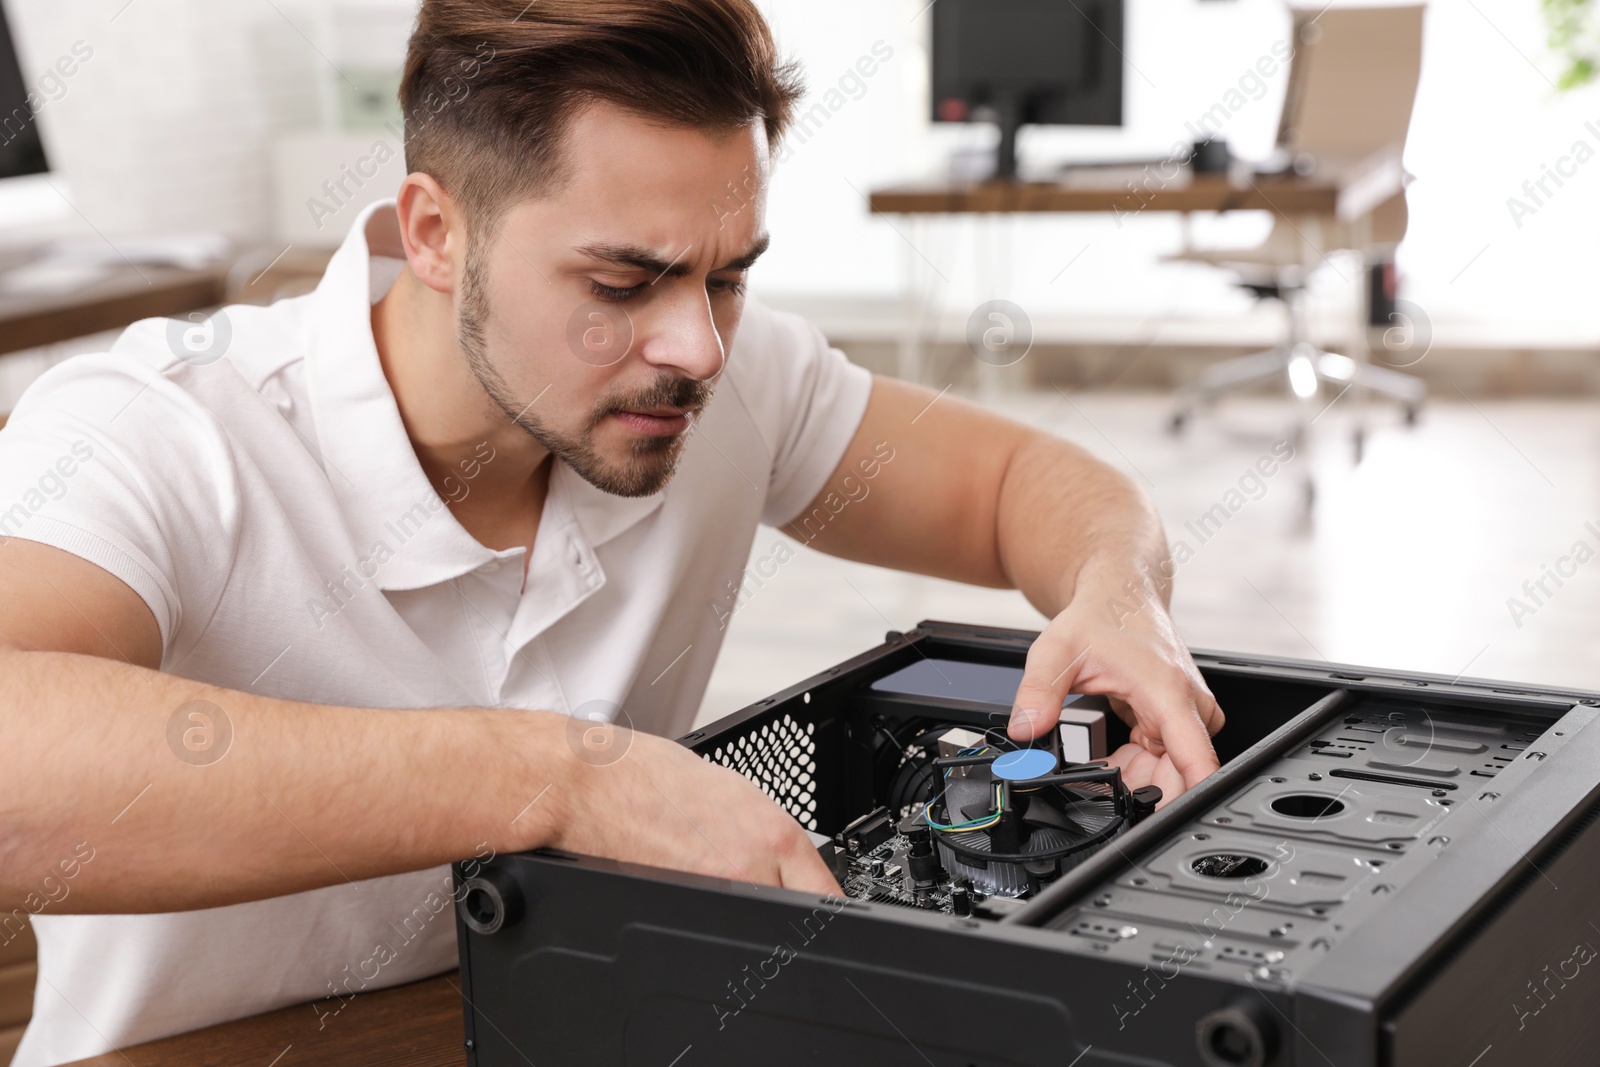 Photo of Male technician repairing computer at table indoors